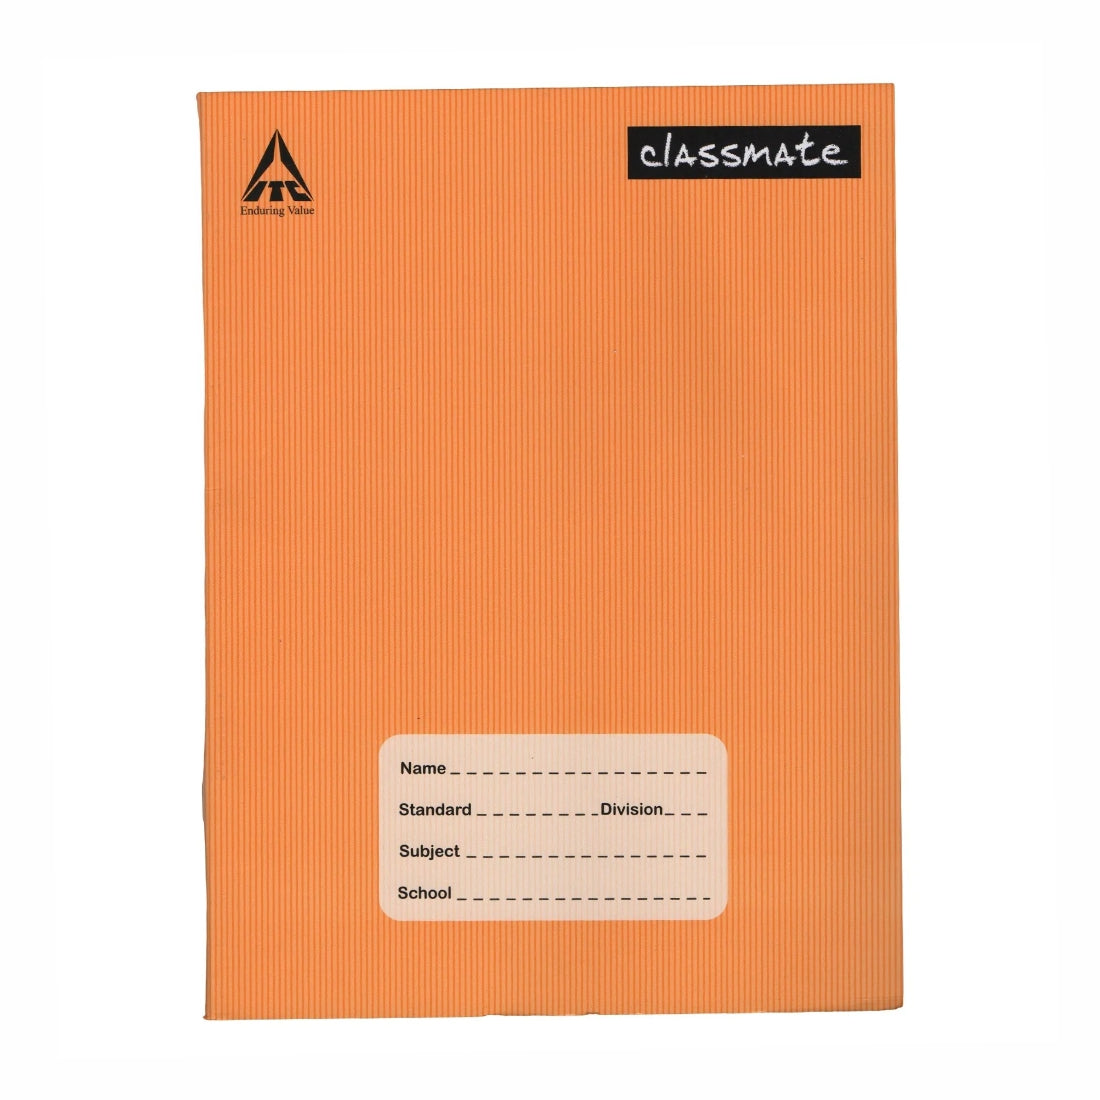 Classmate 240X180mm Notebook - Four Lines with gap